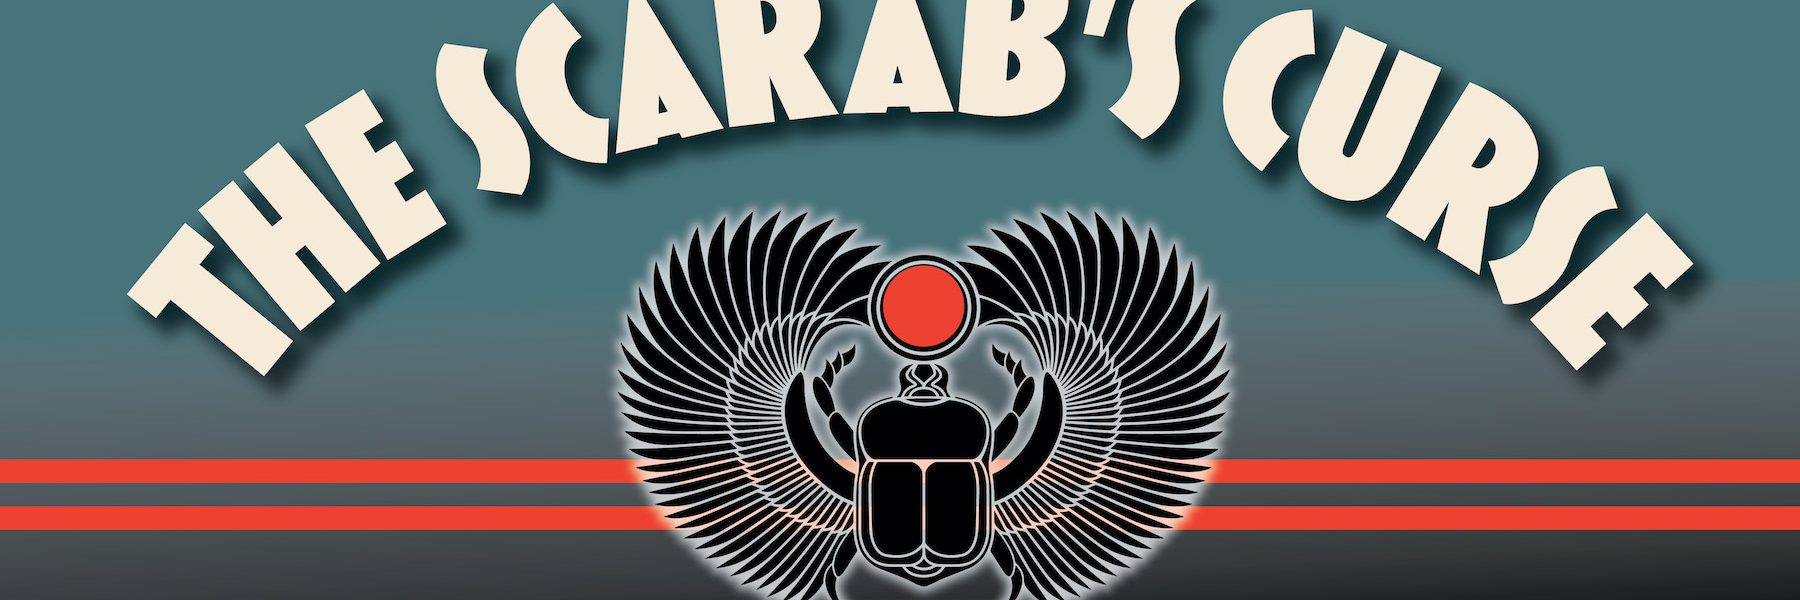 “The Scarab’s Curse” Comes to Life at Shelburne Museum 